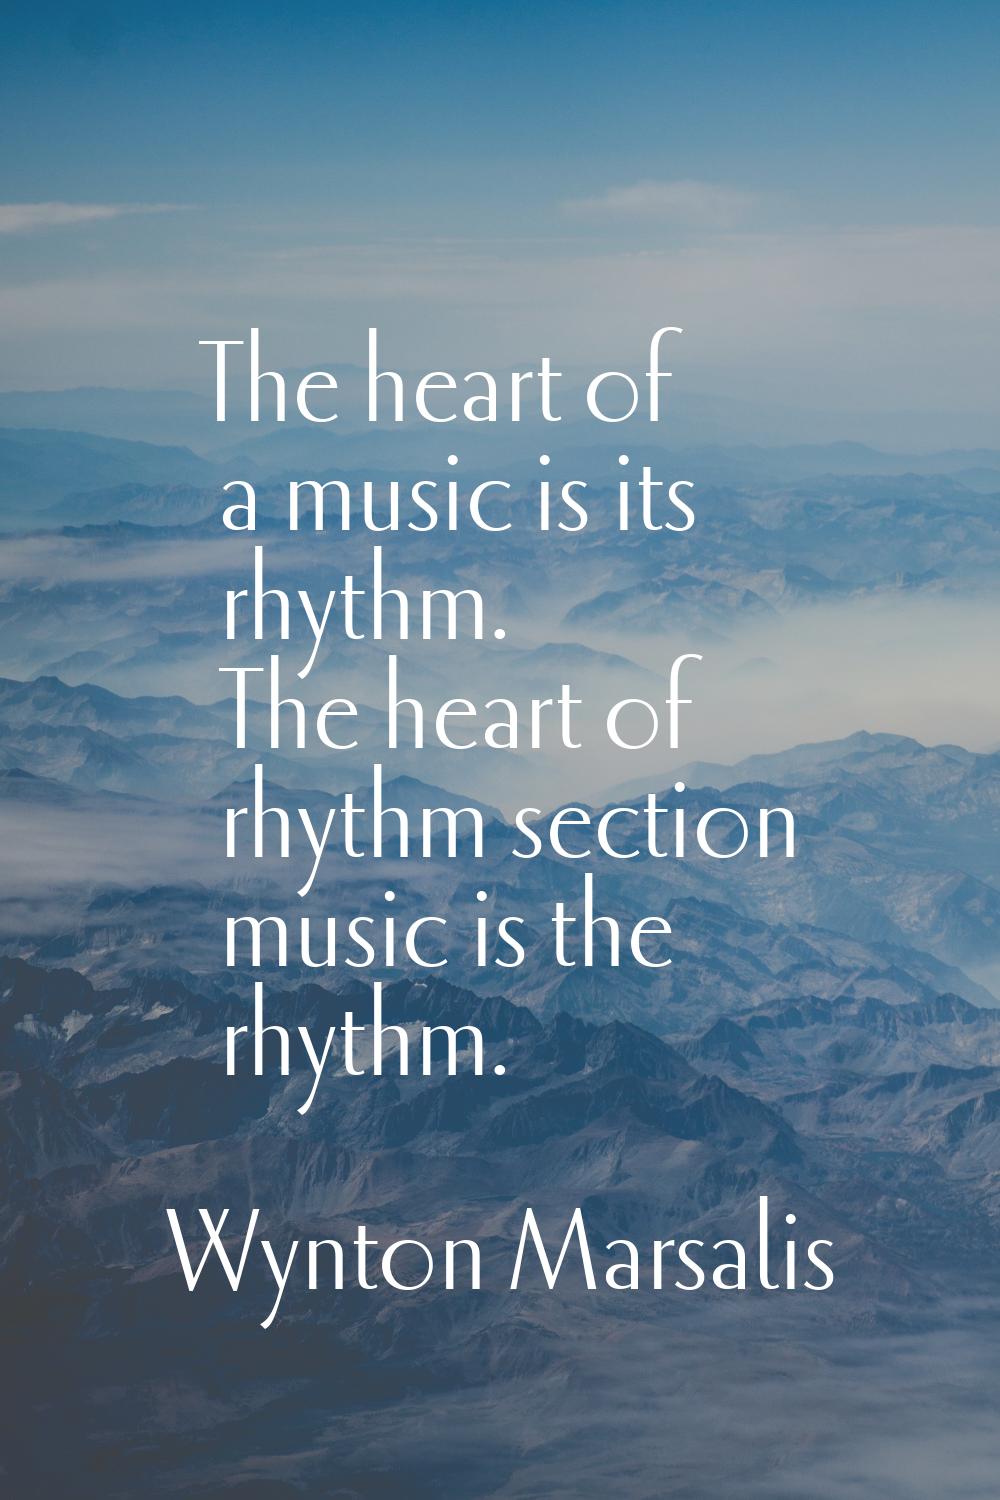 The heart of a music is its rhythm. The heart of rhythm section music is the rhythm.